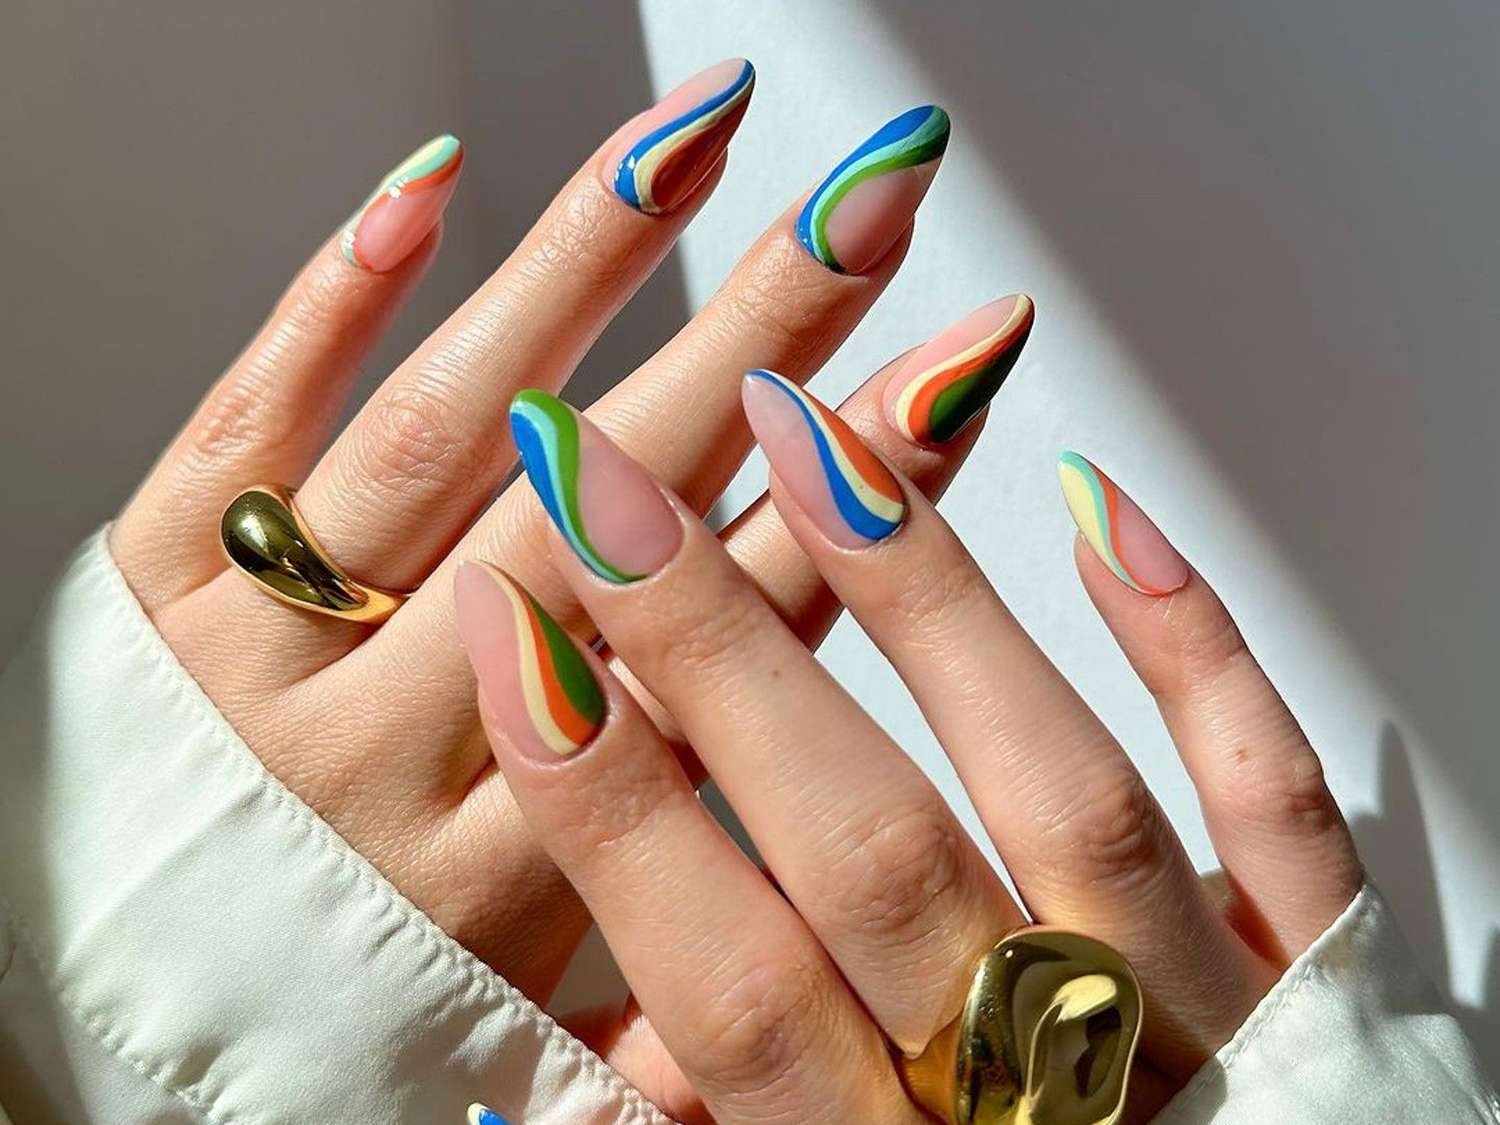 10 Summer French Nail Ideas That Put a Colorful Spin on the Classic Manicure 2